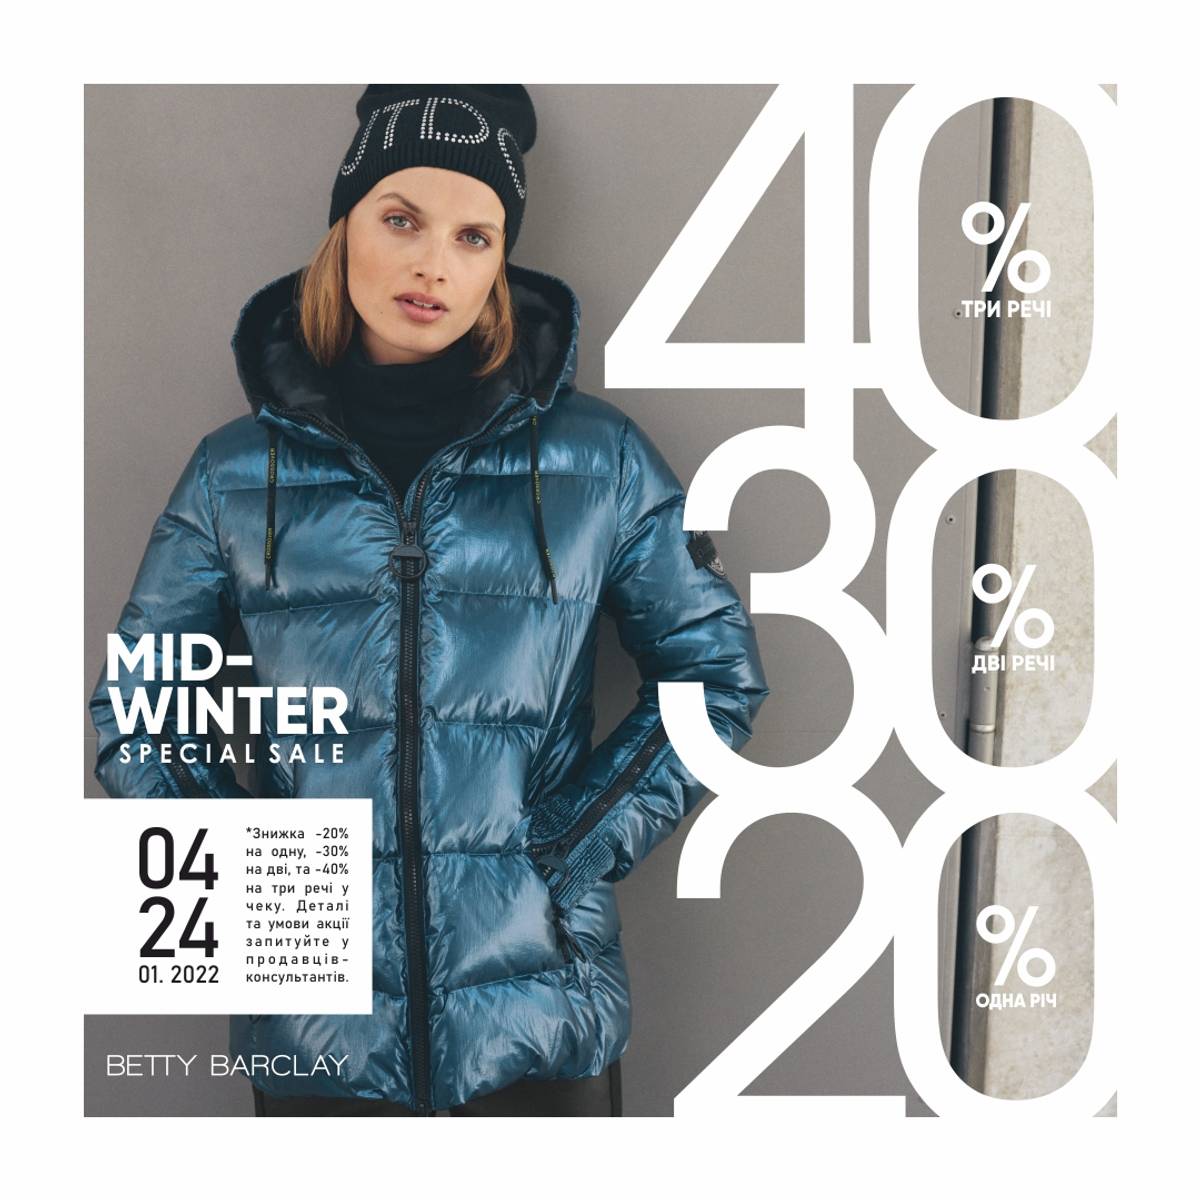 Mid winter special sale